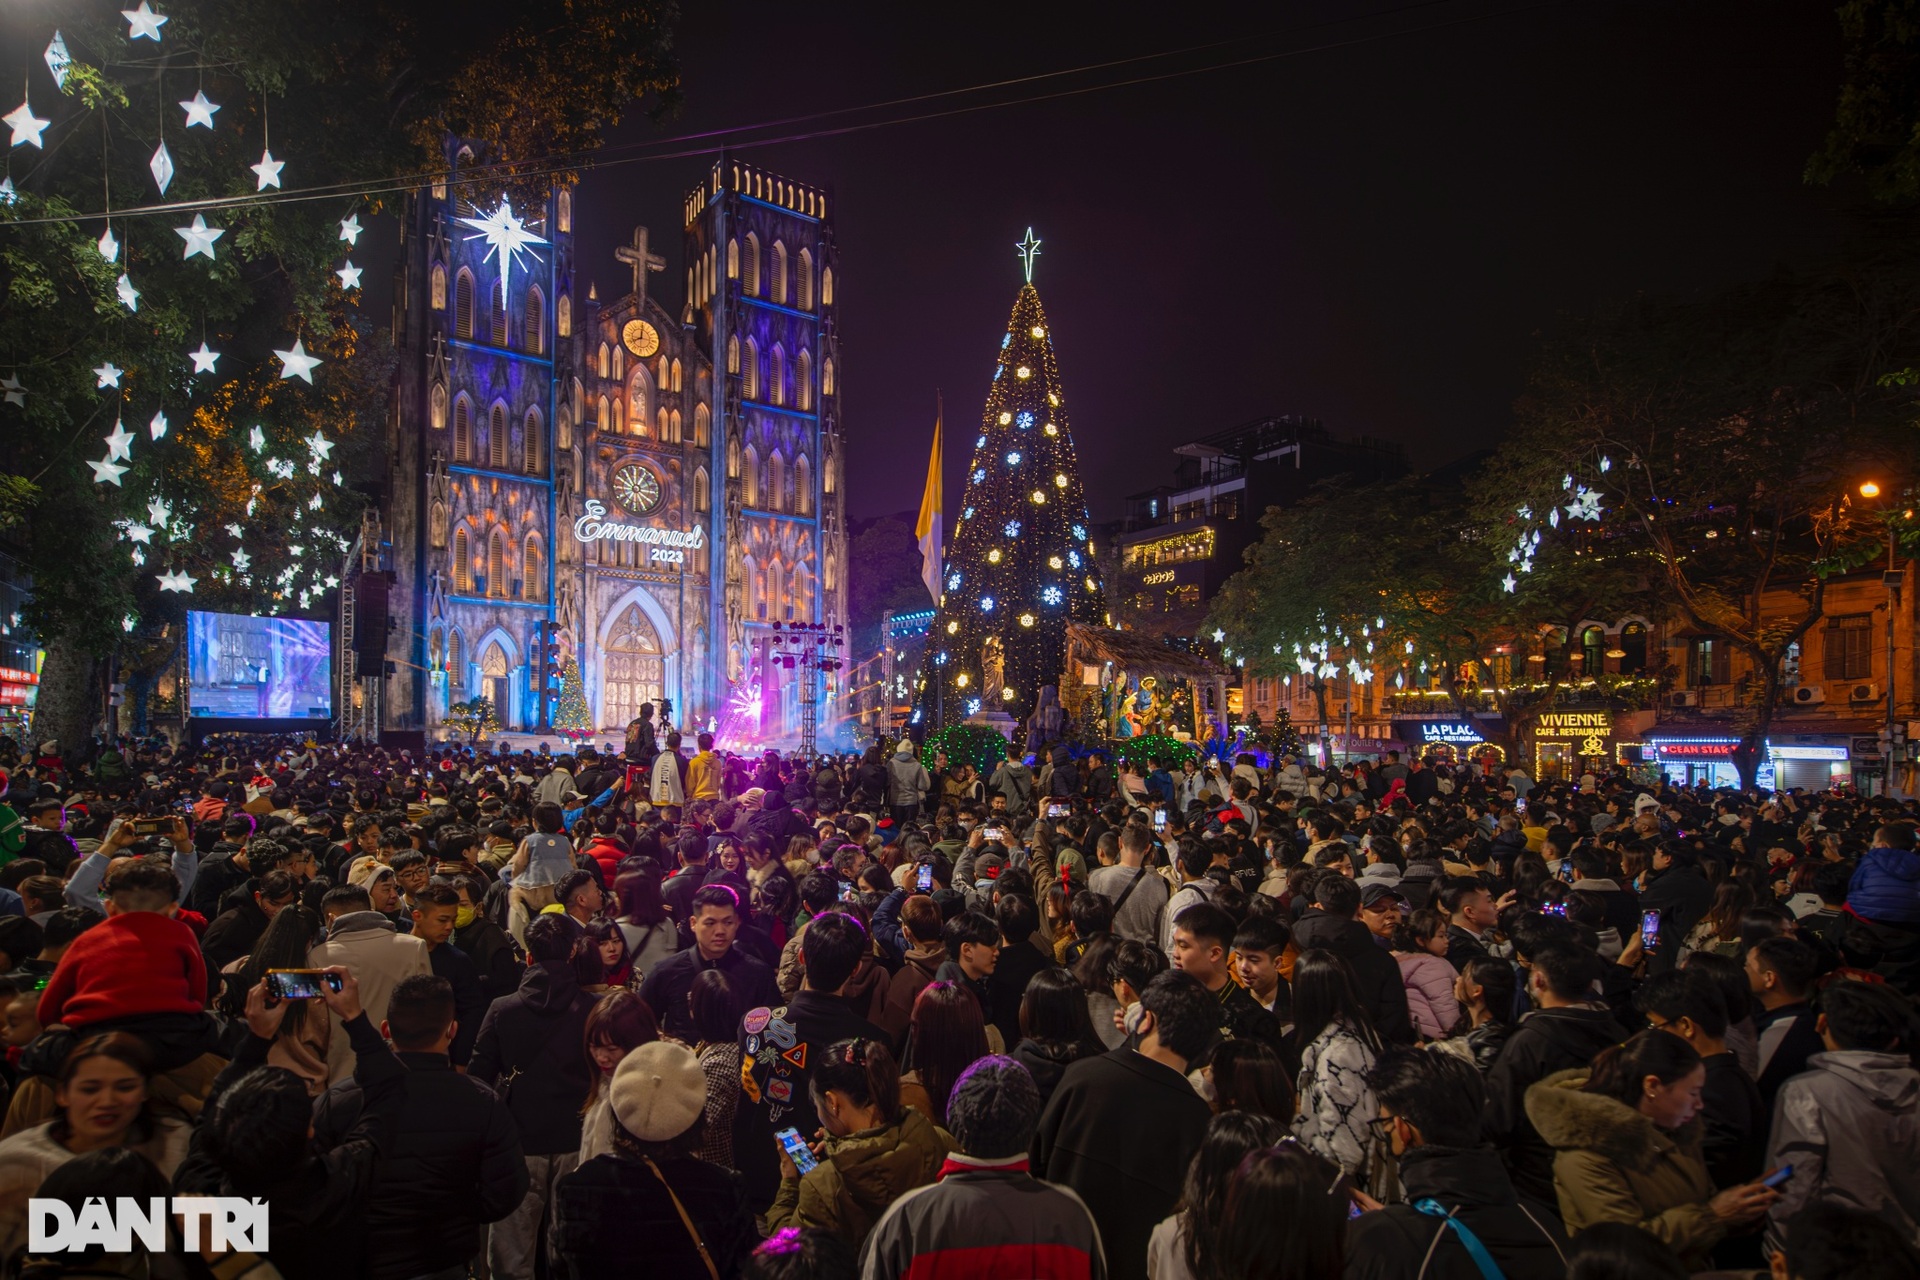 Hanoi is 10 degrees Celsius cold, young people still flock to the Cathedral on Christmas Eve - September